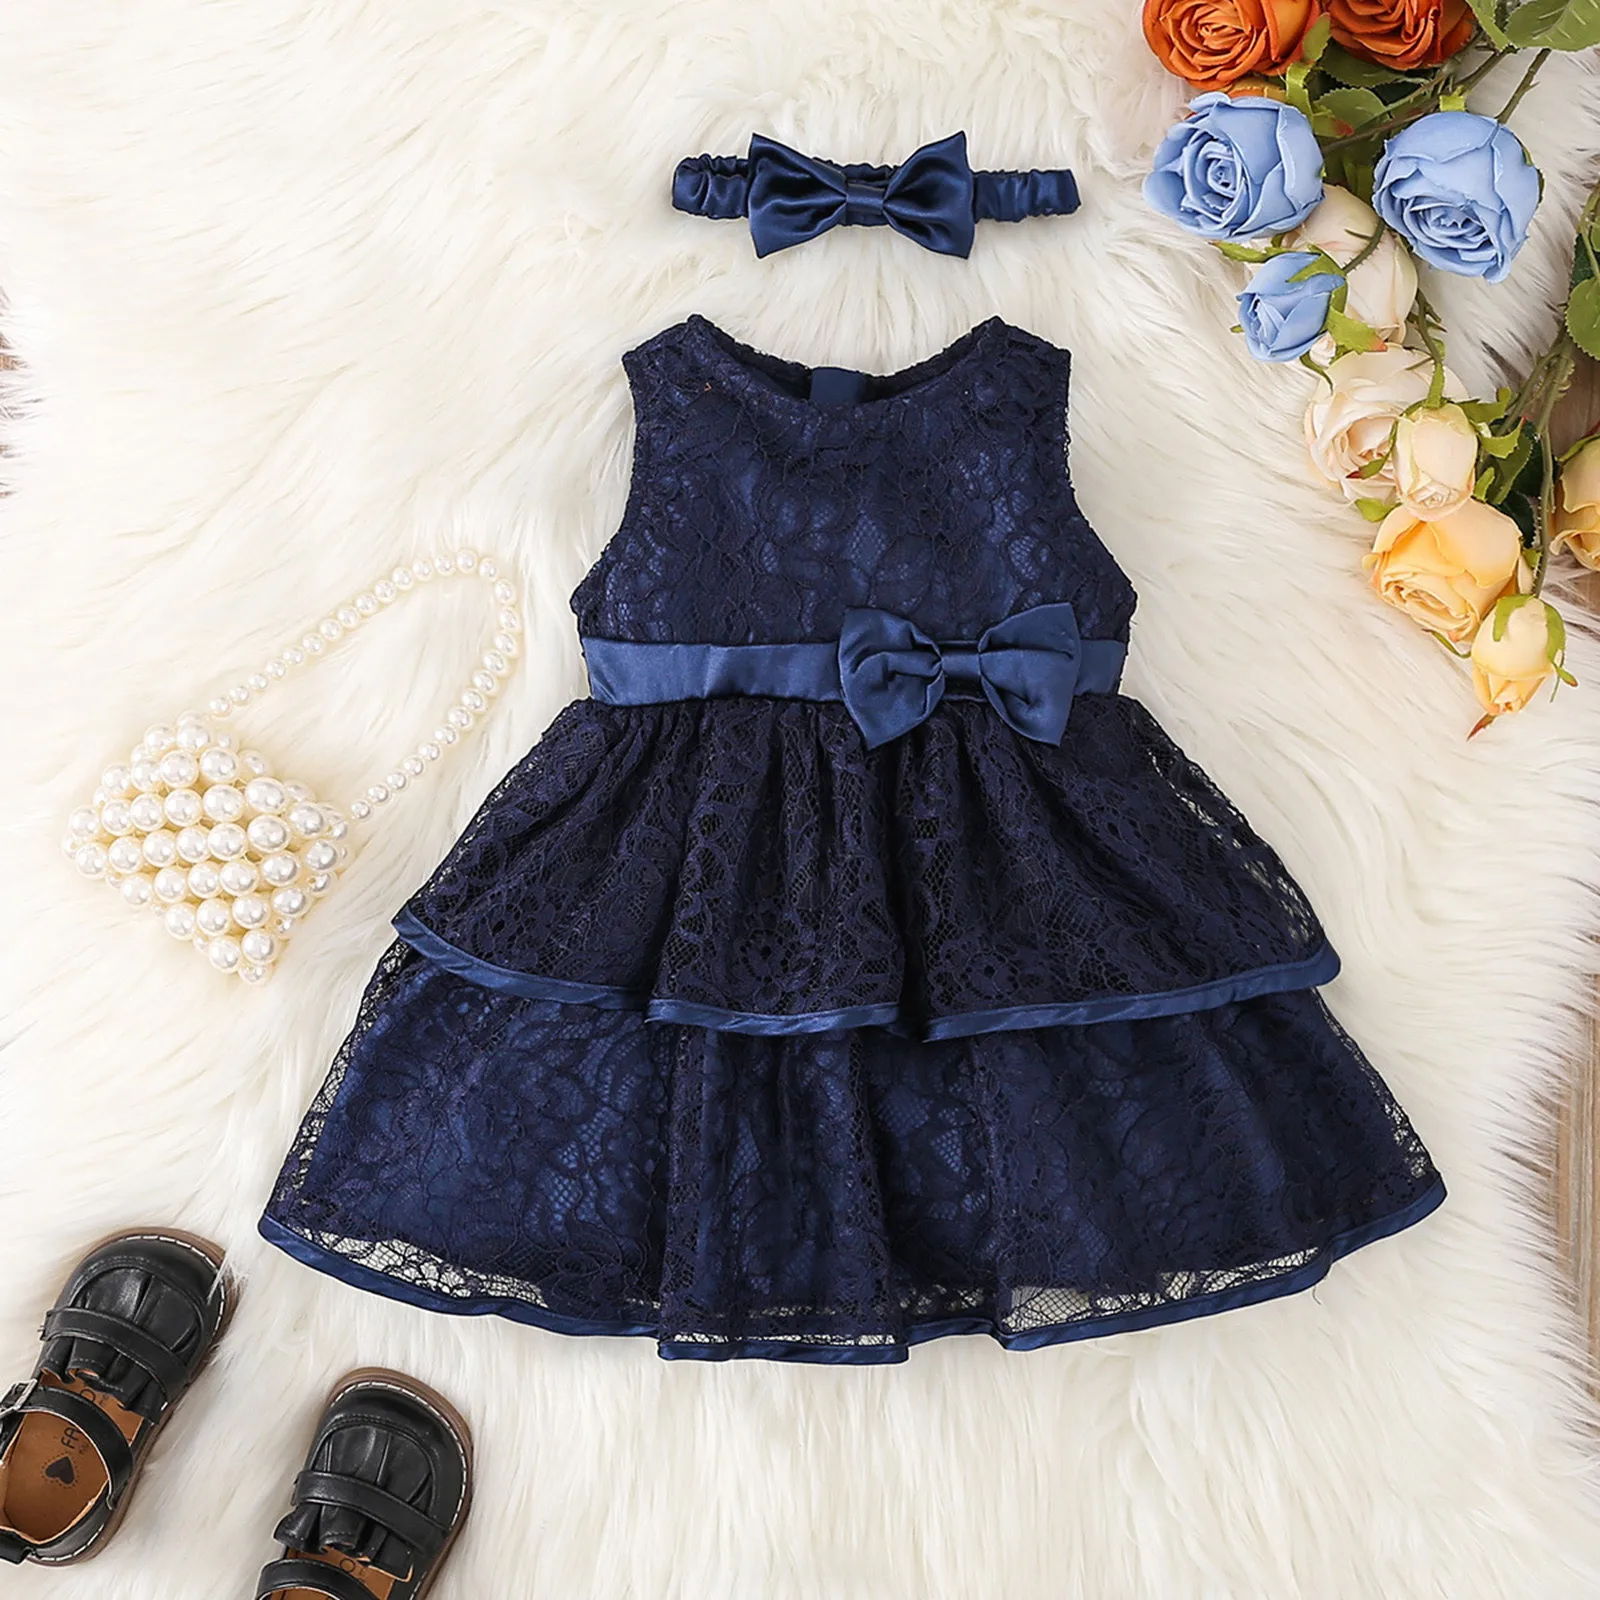 

Summer Dress Toddler Baby Girls Lace Stitching Mid Length Dress Princess Dress With Headband Party Fancy Dresses For Girls 0-3Y